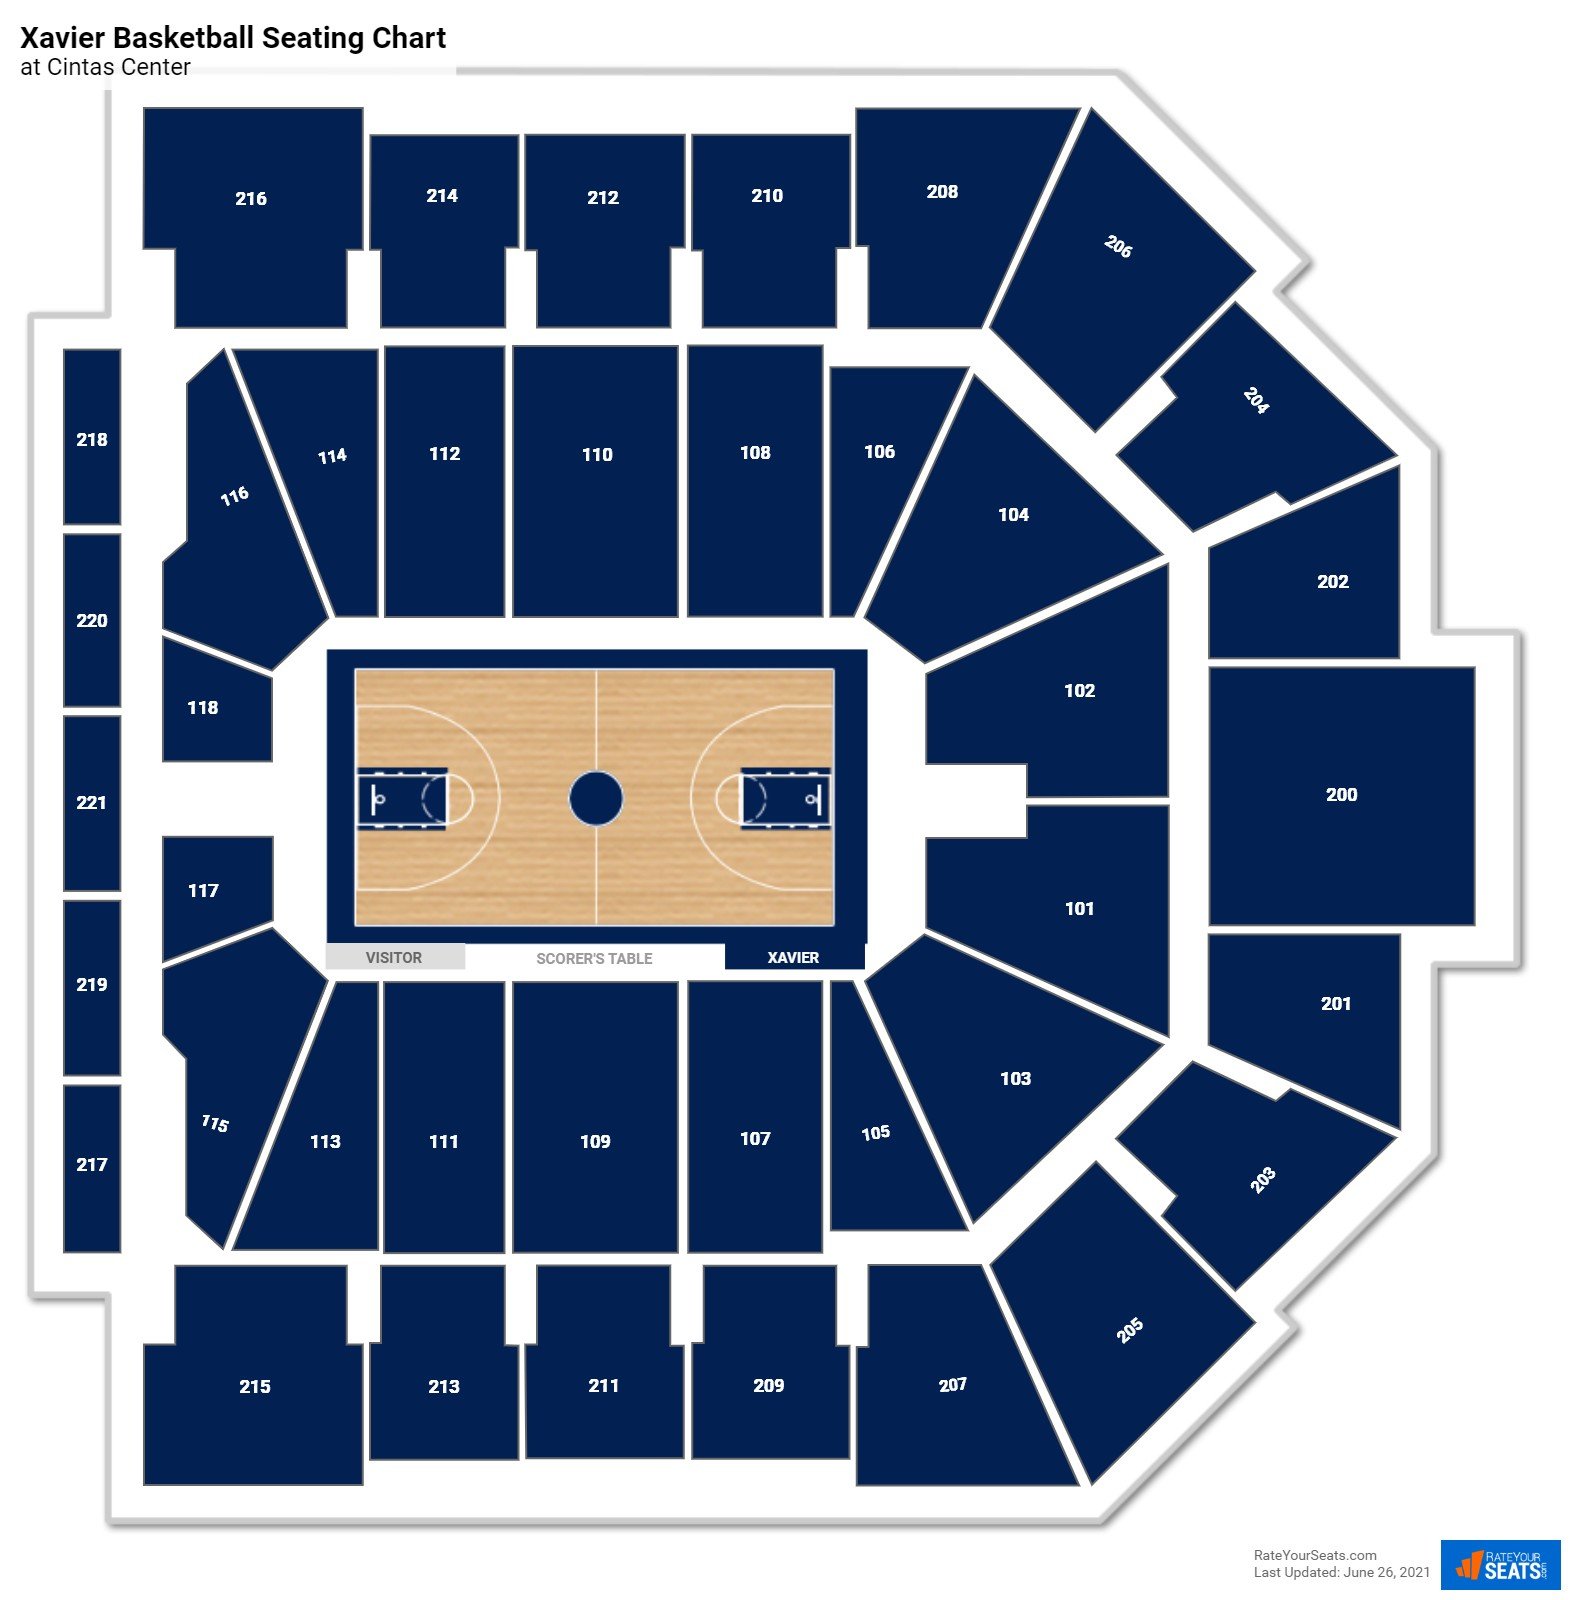 Xavier Musketeers Seating Chart at Cintas Center